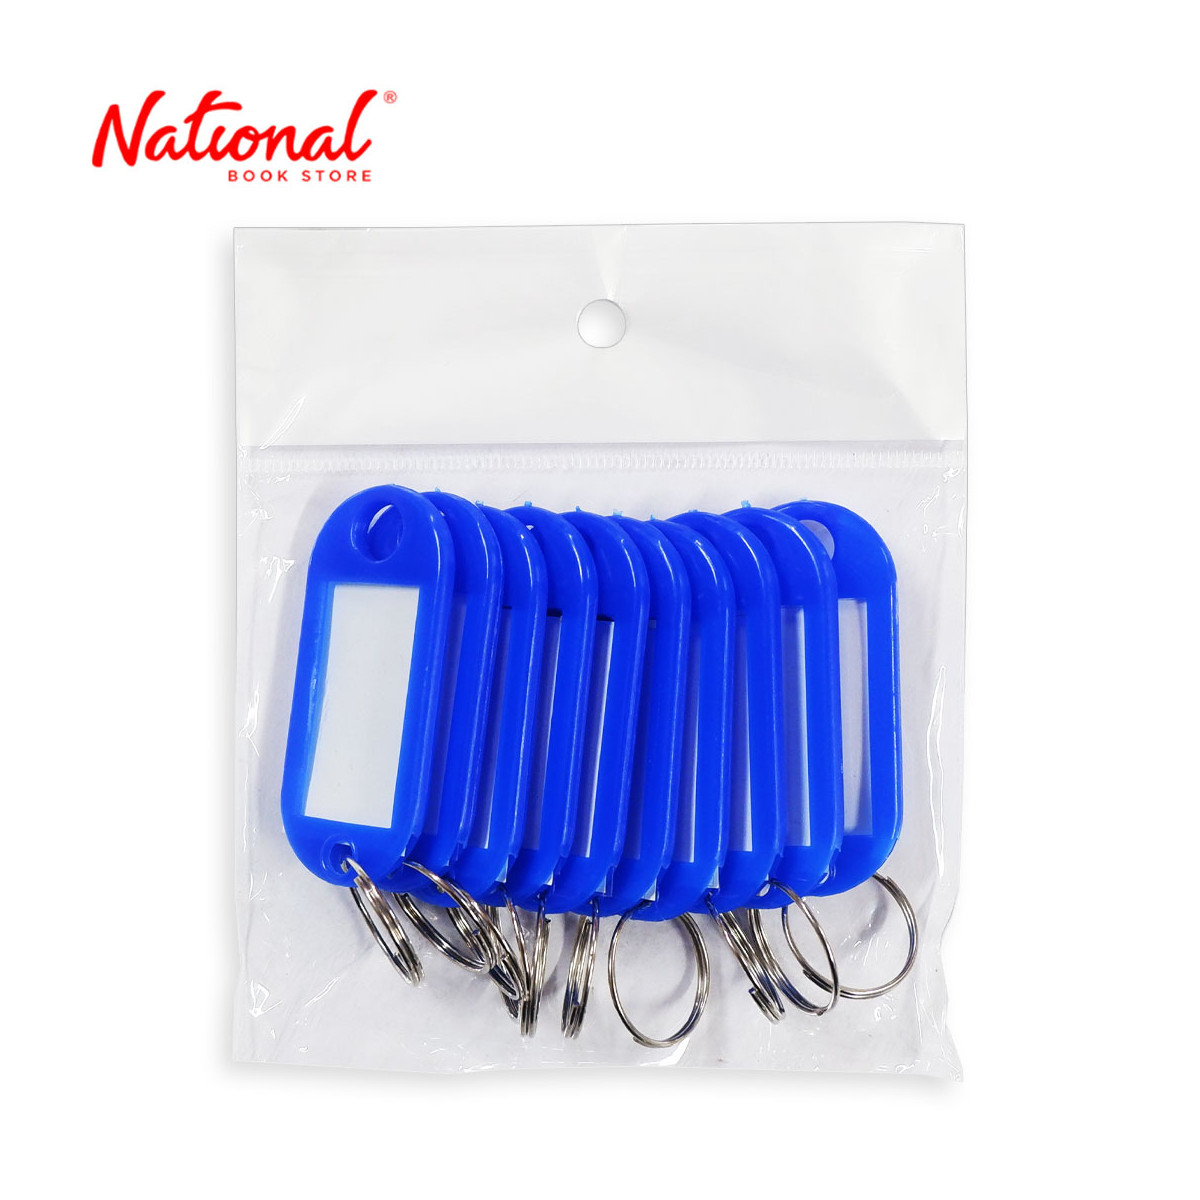 Tiger Key Tags 10 pieces Per Pack, Blue - Office Stationery - Filing Accessories